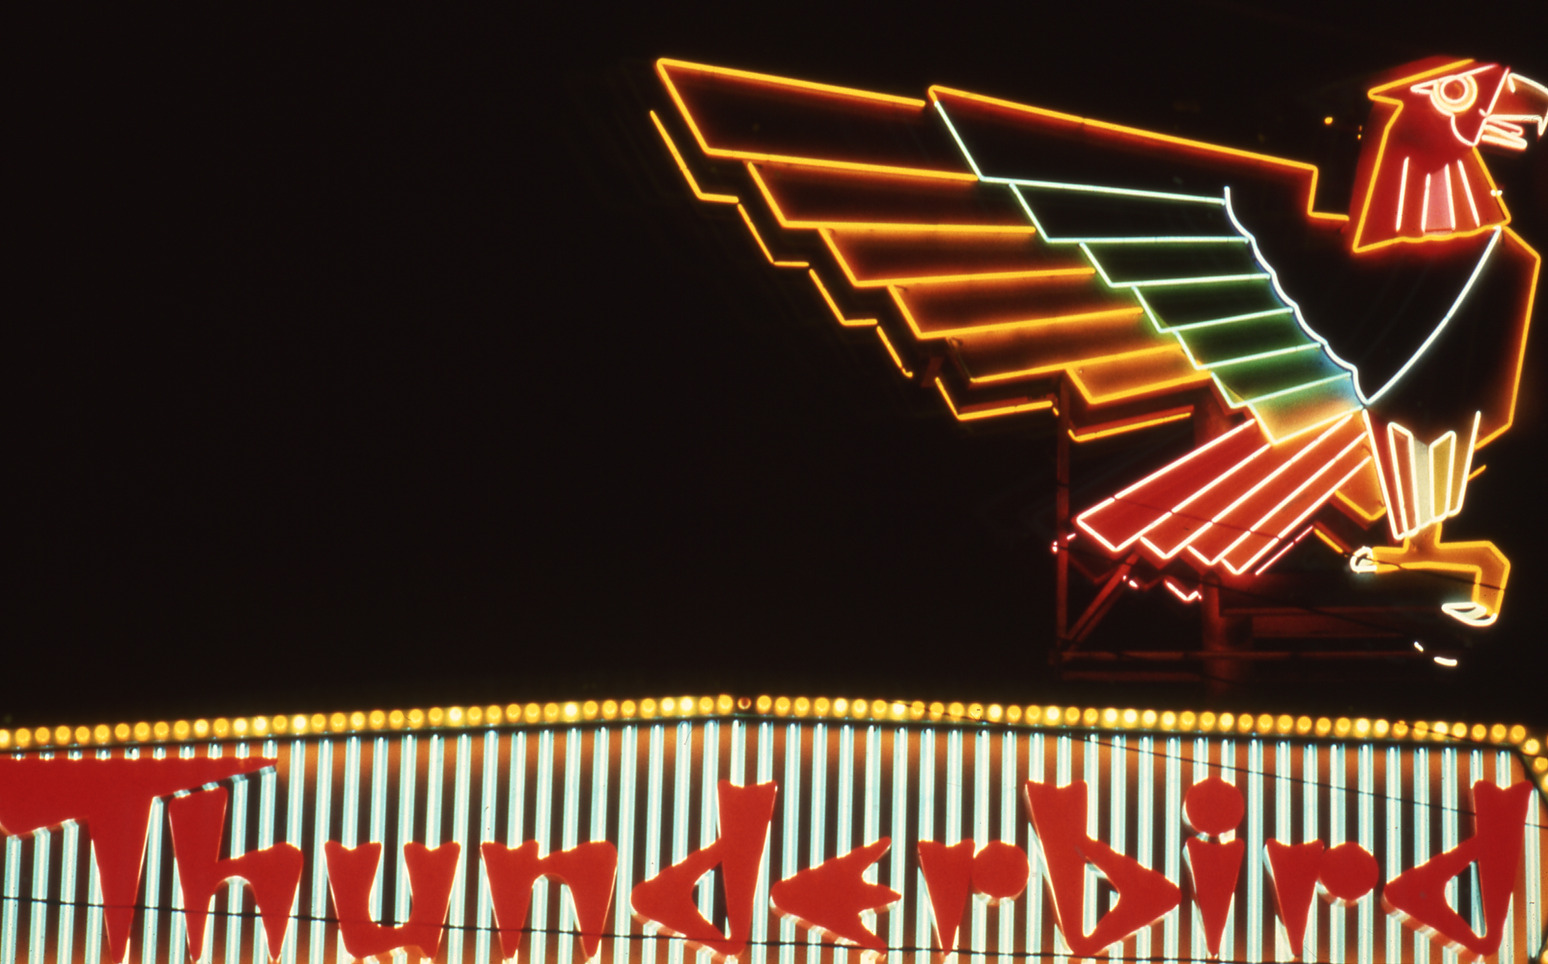 Thunderbird Hotel lettering, mounted pylon, and marquee signs, Las Vegas, Nevada: photographic print